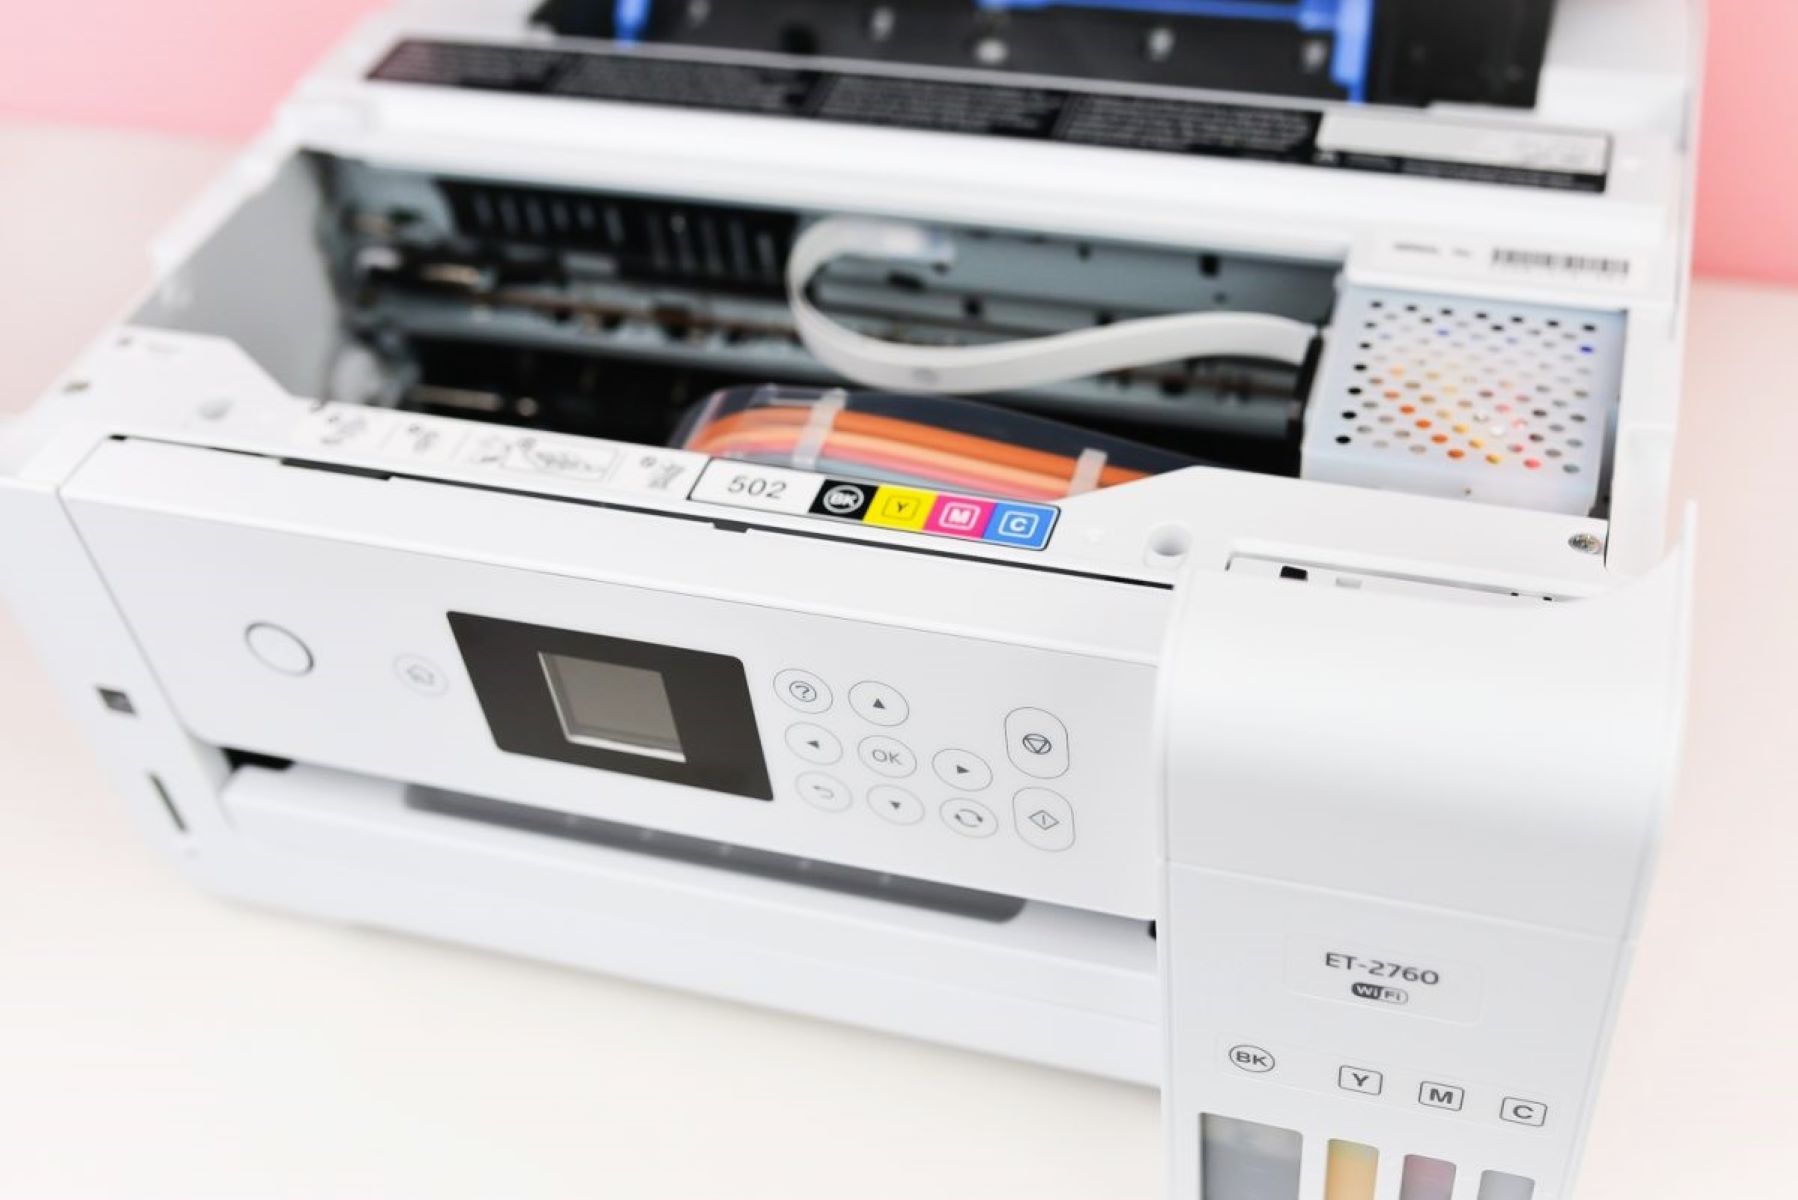 How To Clean Epson Printer Heads Et-2760